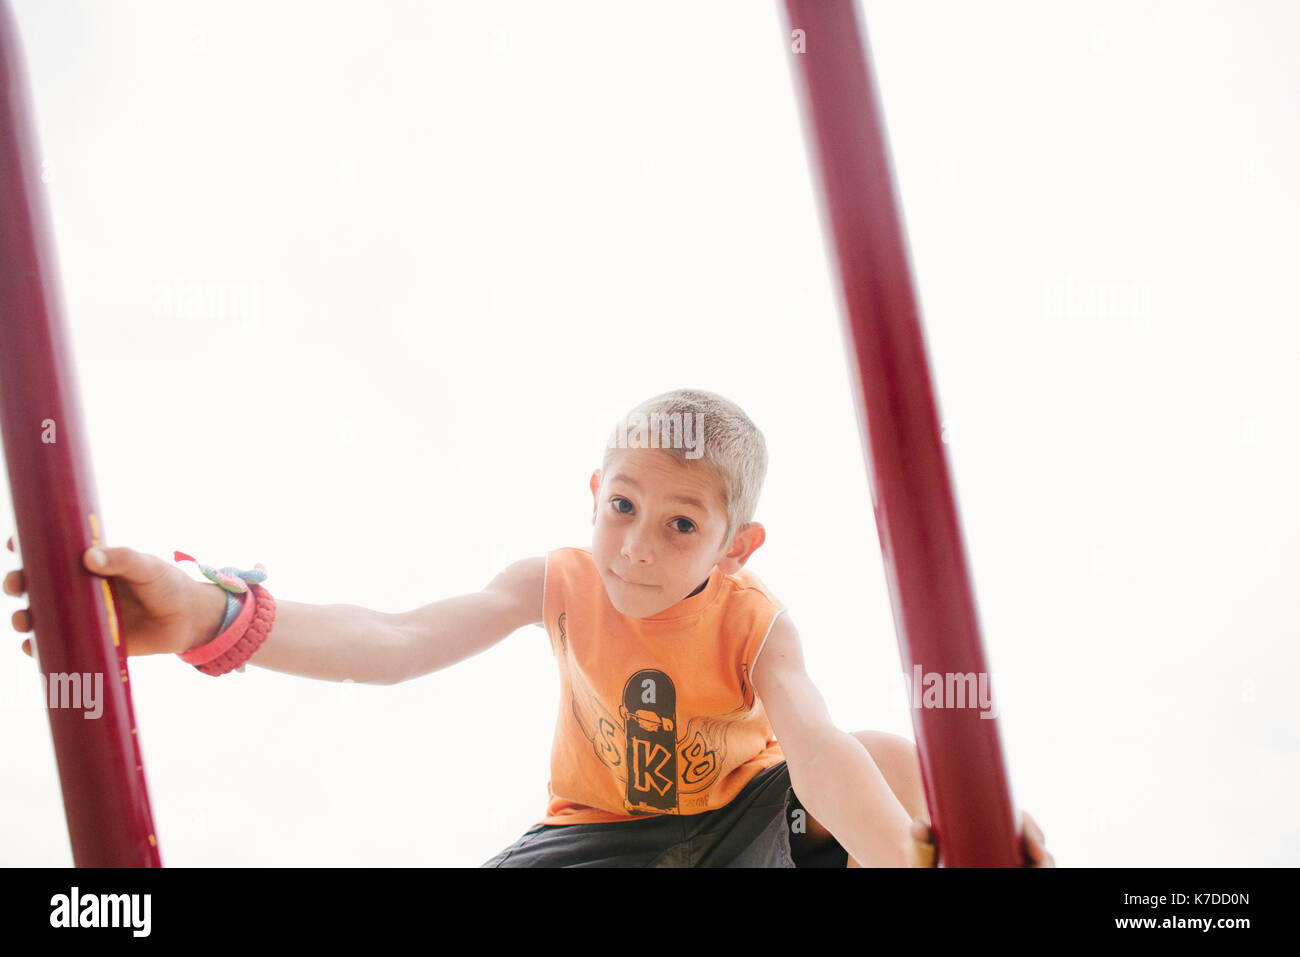 Low angle portrait of boy on outdoor play equipment against clear sky Stock Photo